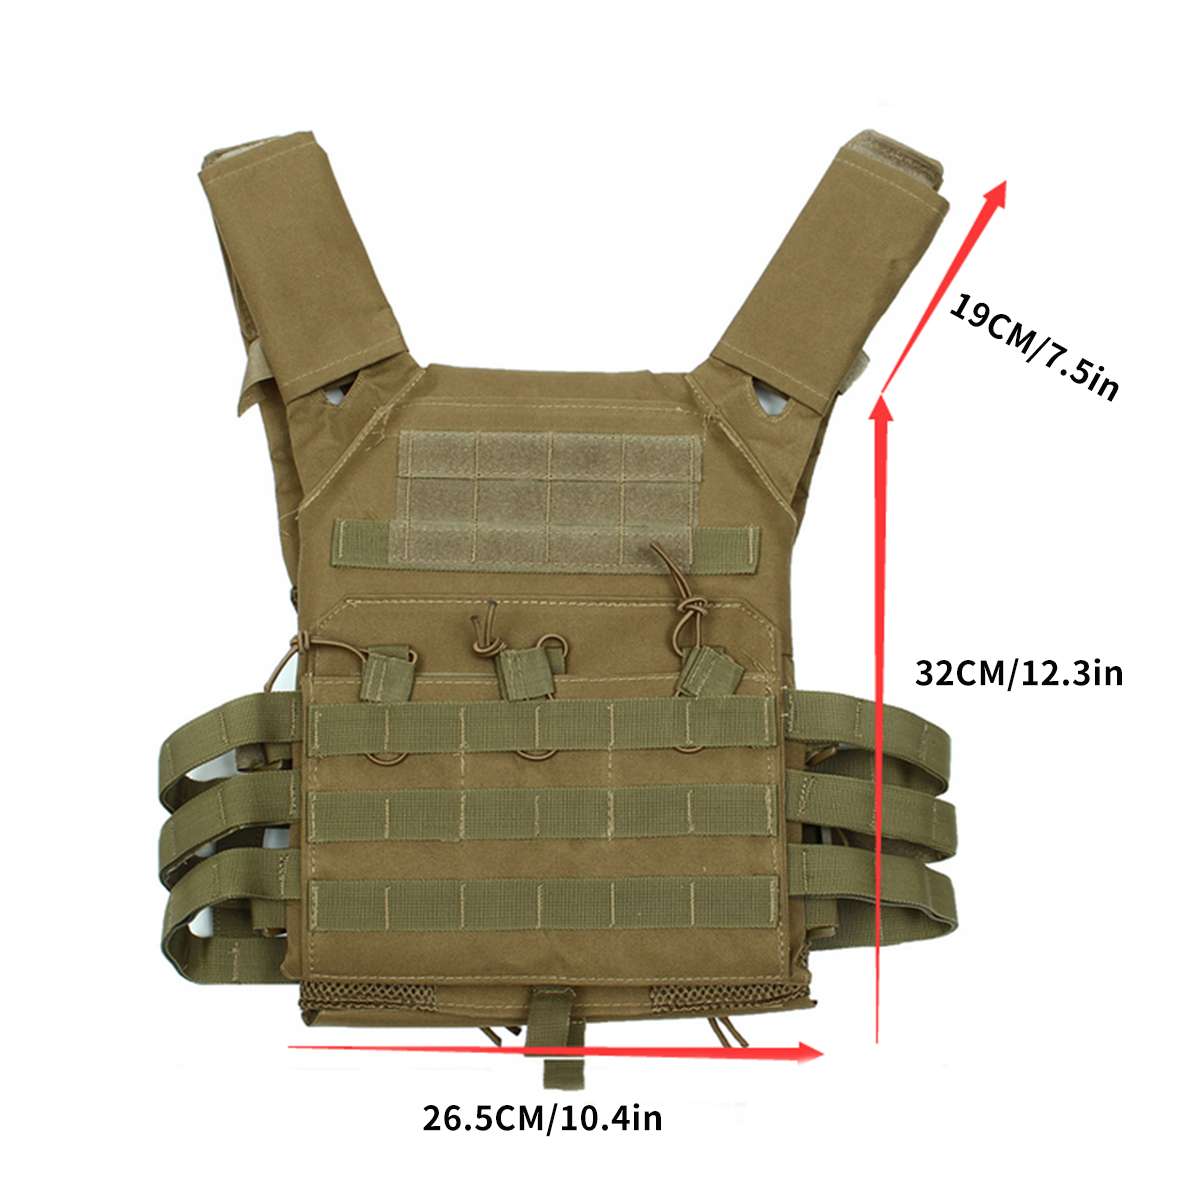 Outdoor-Molle-System-Tactical-Vest-Ultra-Light-Breathable-Adjustable-Armor-Plate-Vest-with-Pouches-1691276-2